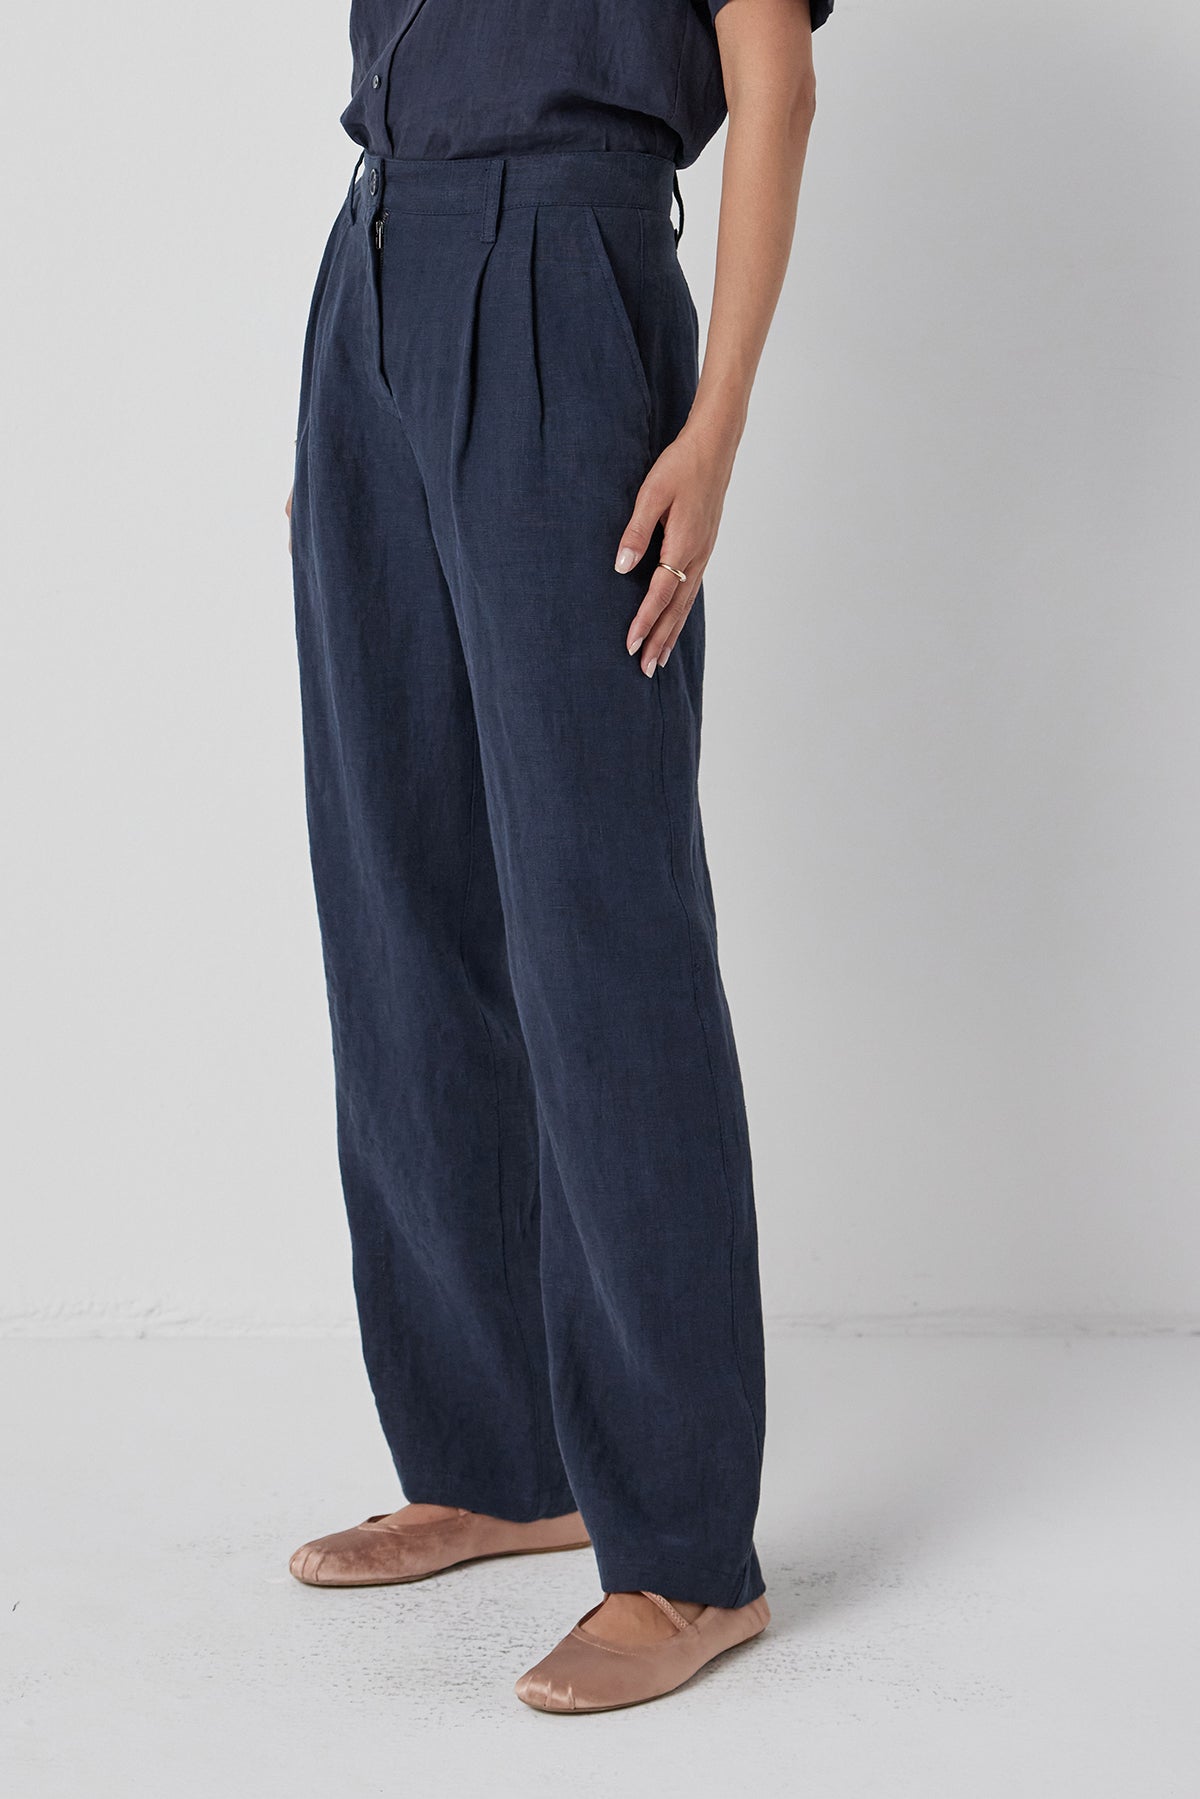 Woman in Velvet by Jenny Graham's POMONA PANT, dark, heavy-weight linen straight-leg pants and tan flats standing against a white background.-36409575702721